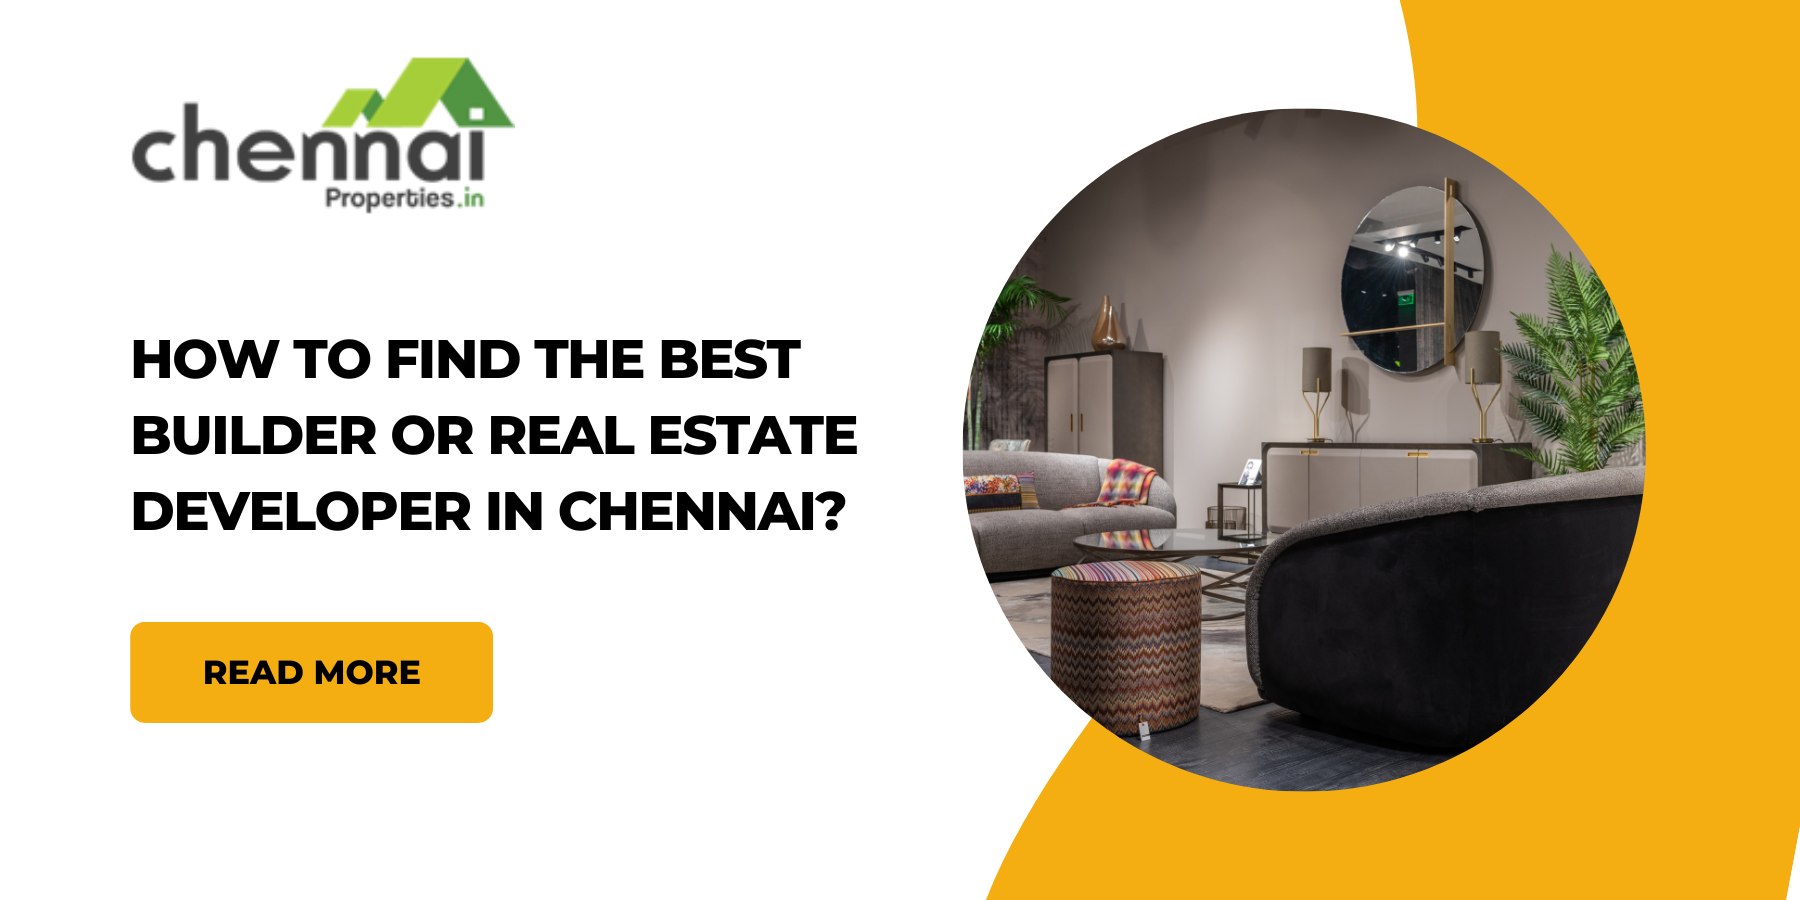 How to find the best builder or real estate developer in Chennai?